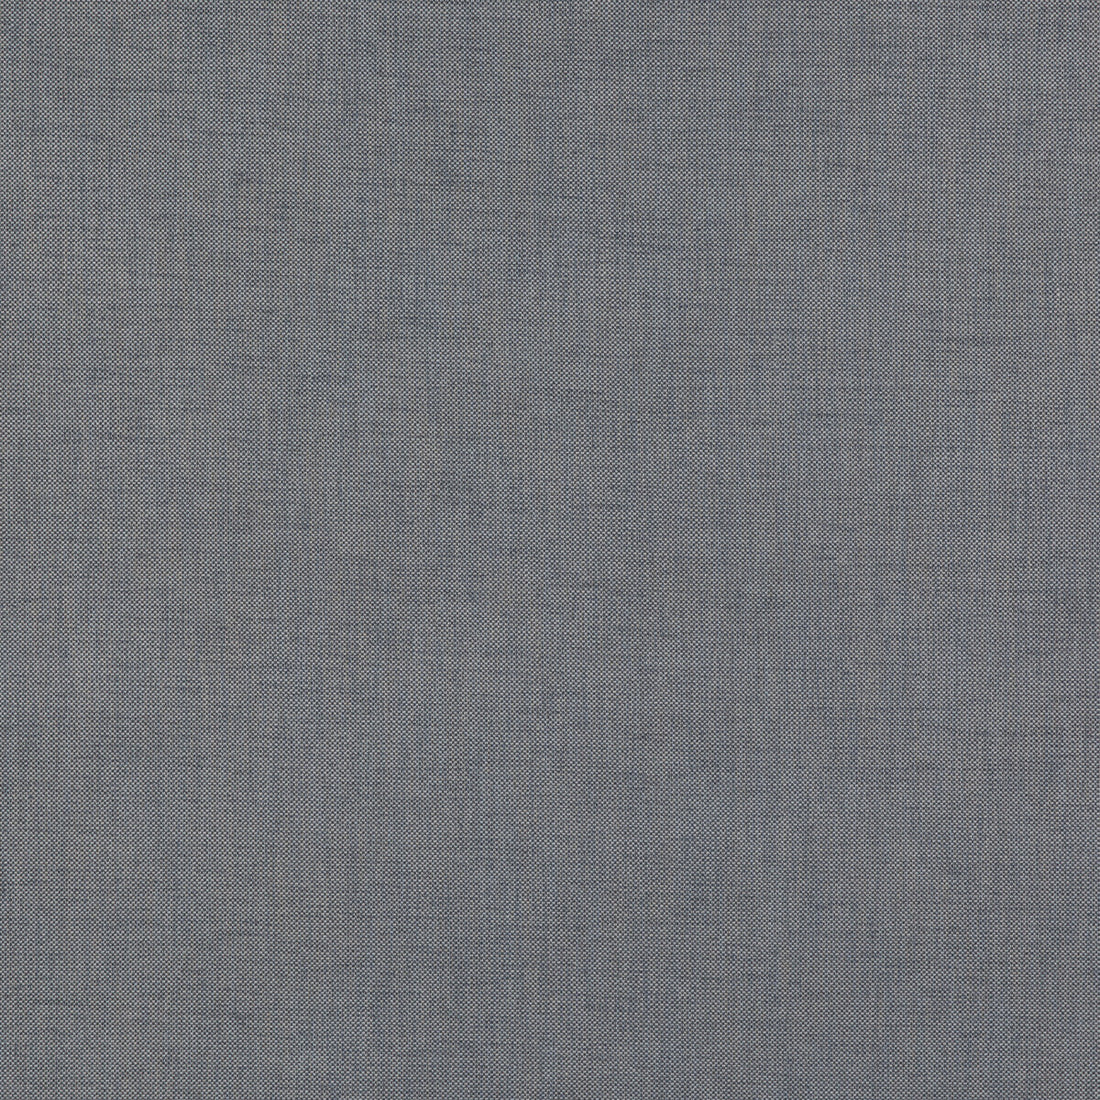 Darwen fabric in indigo color - pattern BF10957.680.0 - by G P &amp; J Baker in the Baker House Textures collection